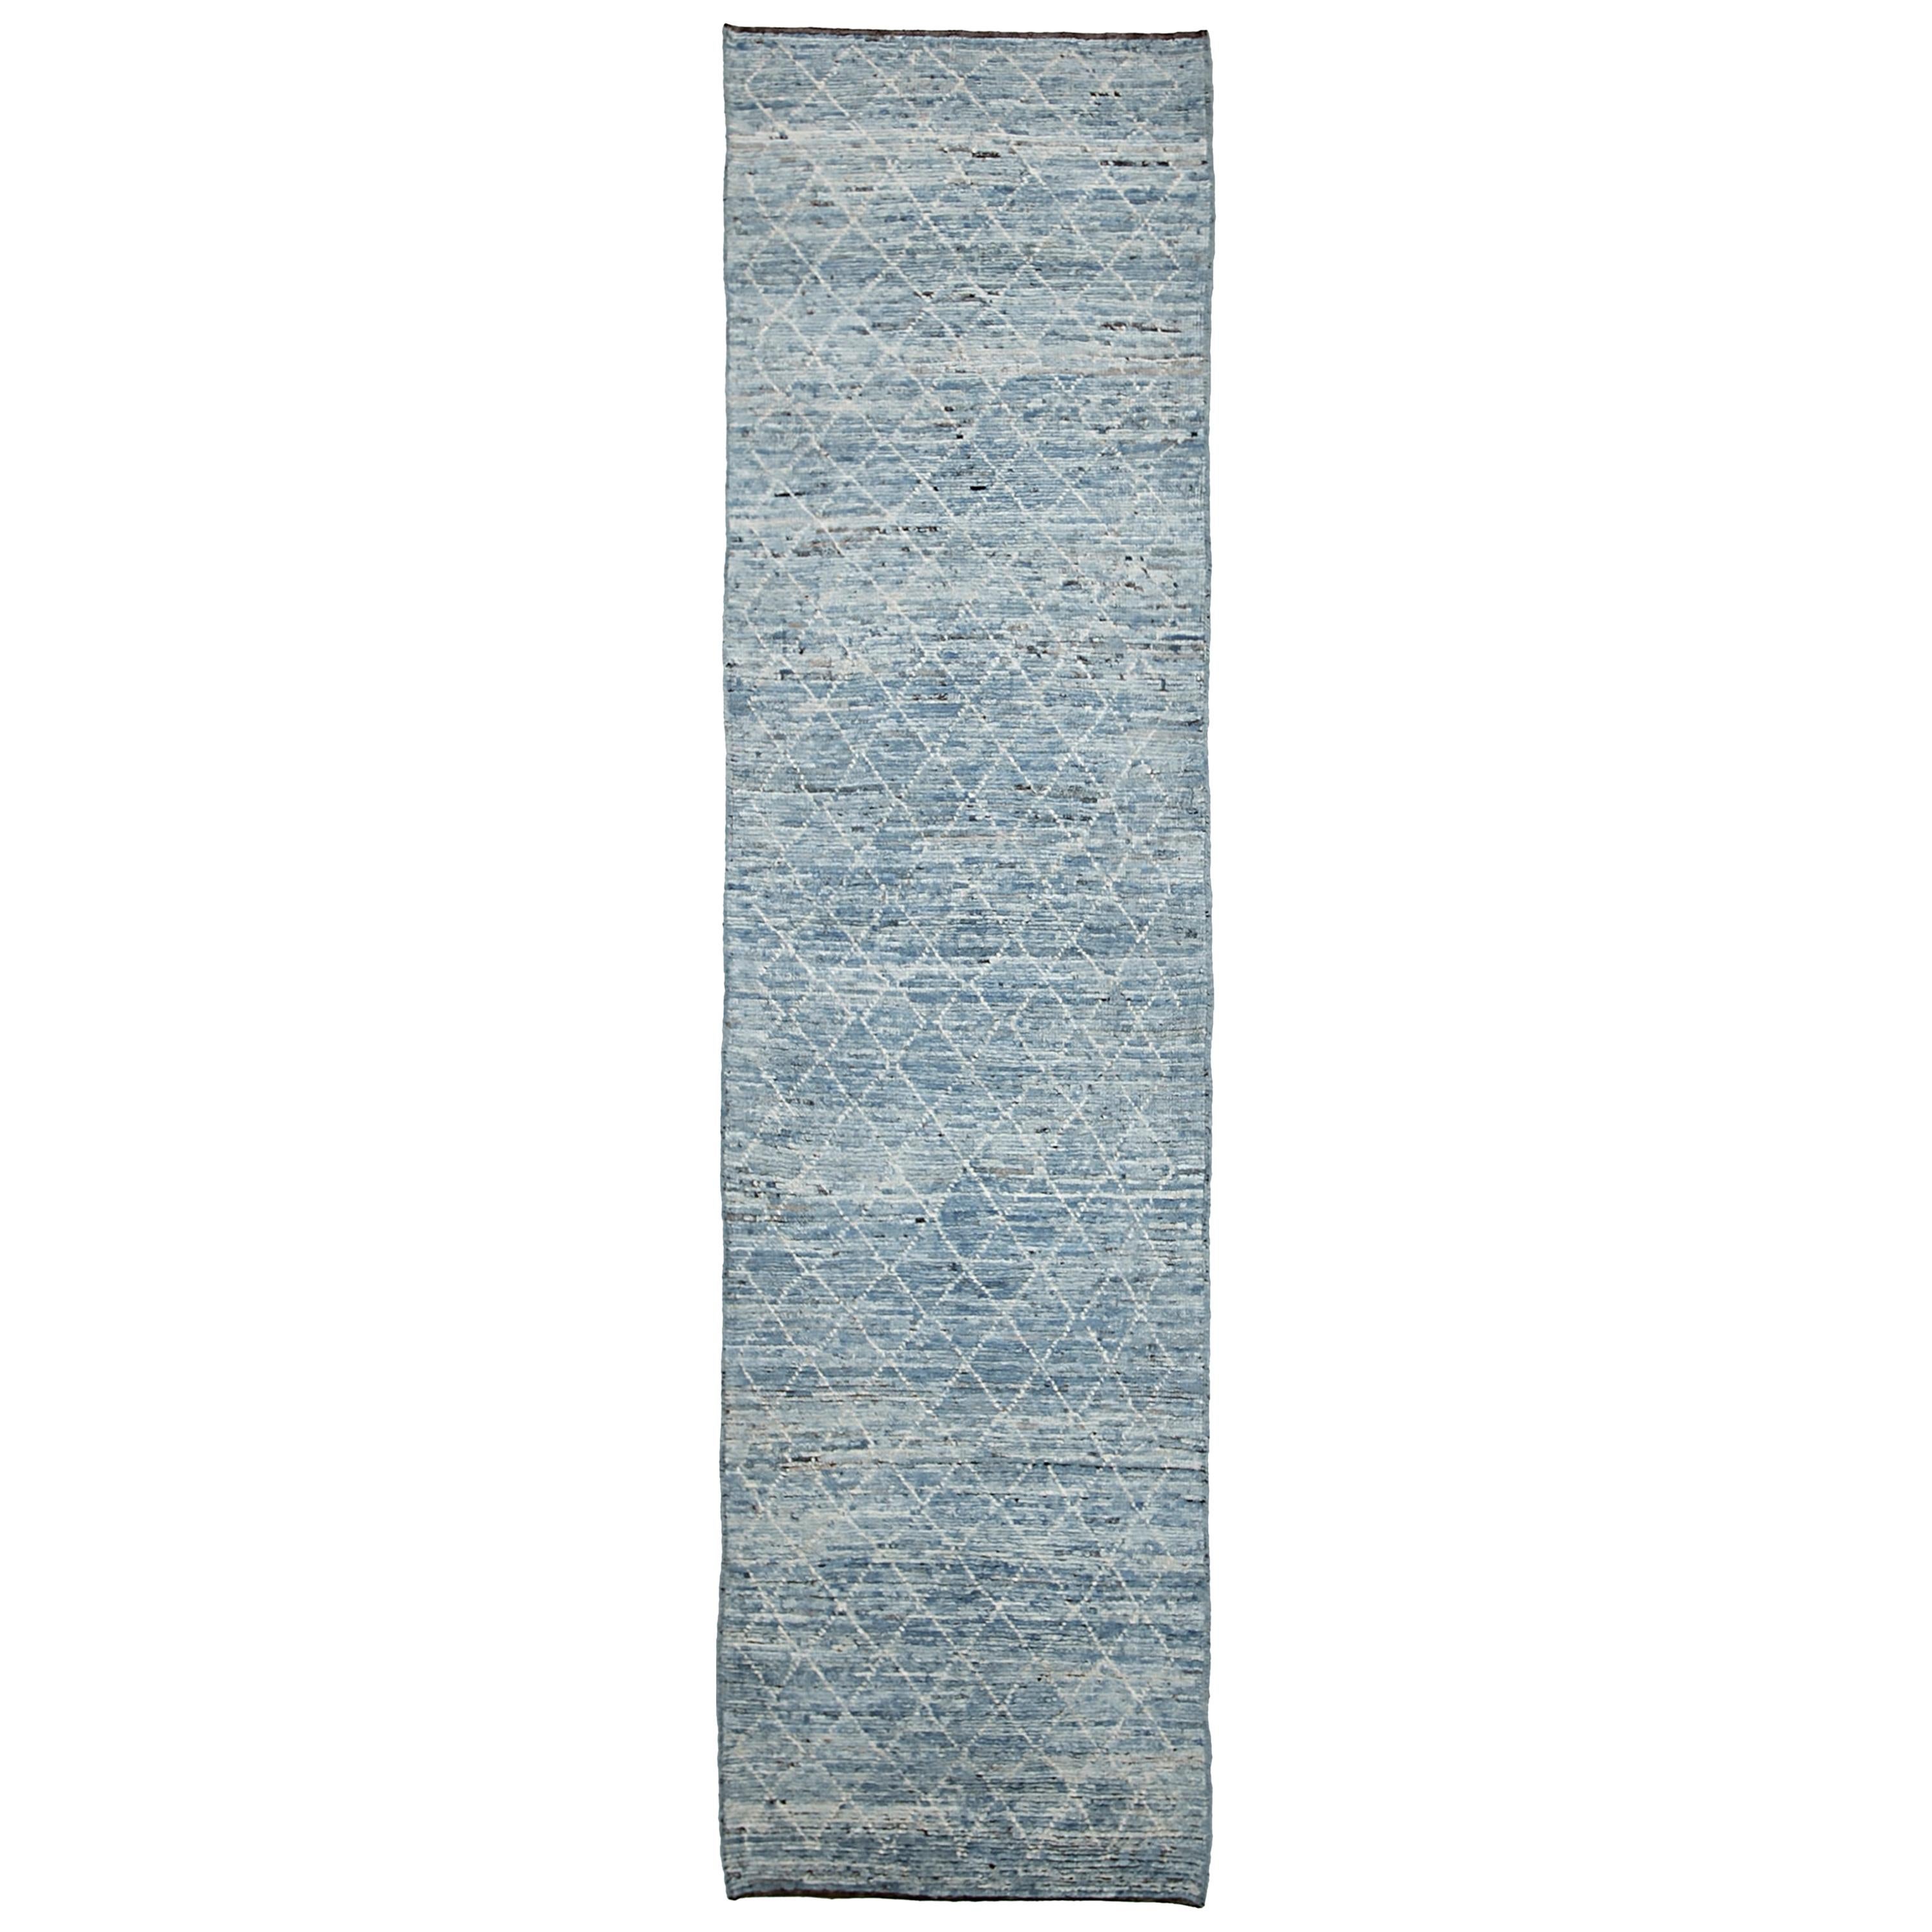 Nazmiyal Collection Modern Moroccan Style Runner Rug. 2 ft 9 in x 10 ft 9 in